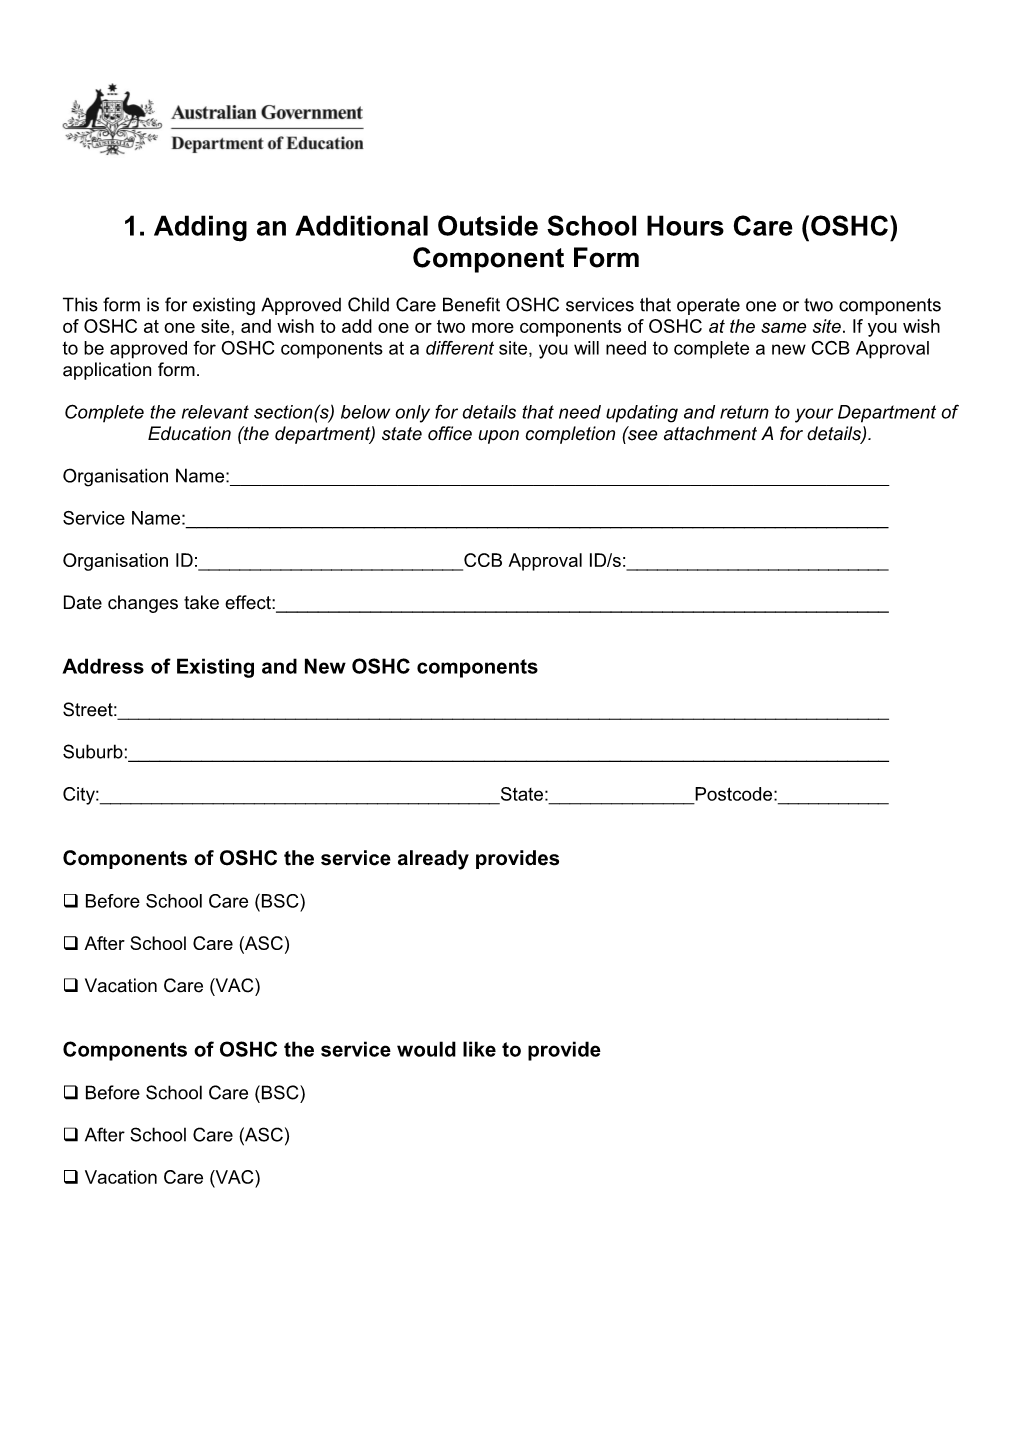 Adding an Additional Outside School Hours Care (OSHC) Component Form